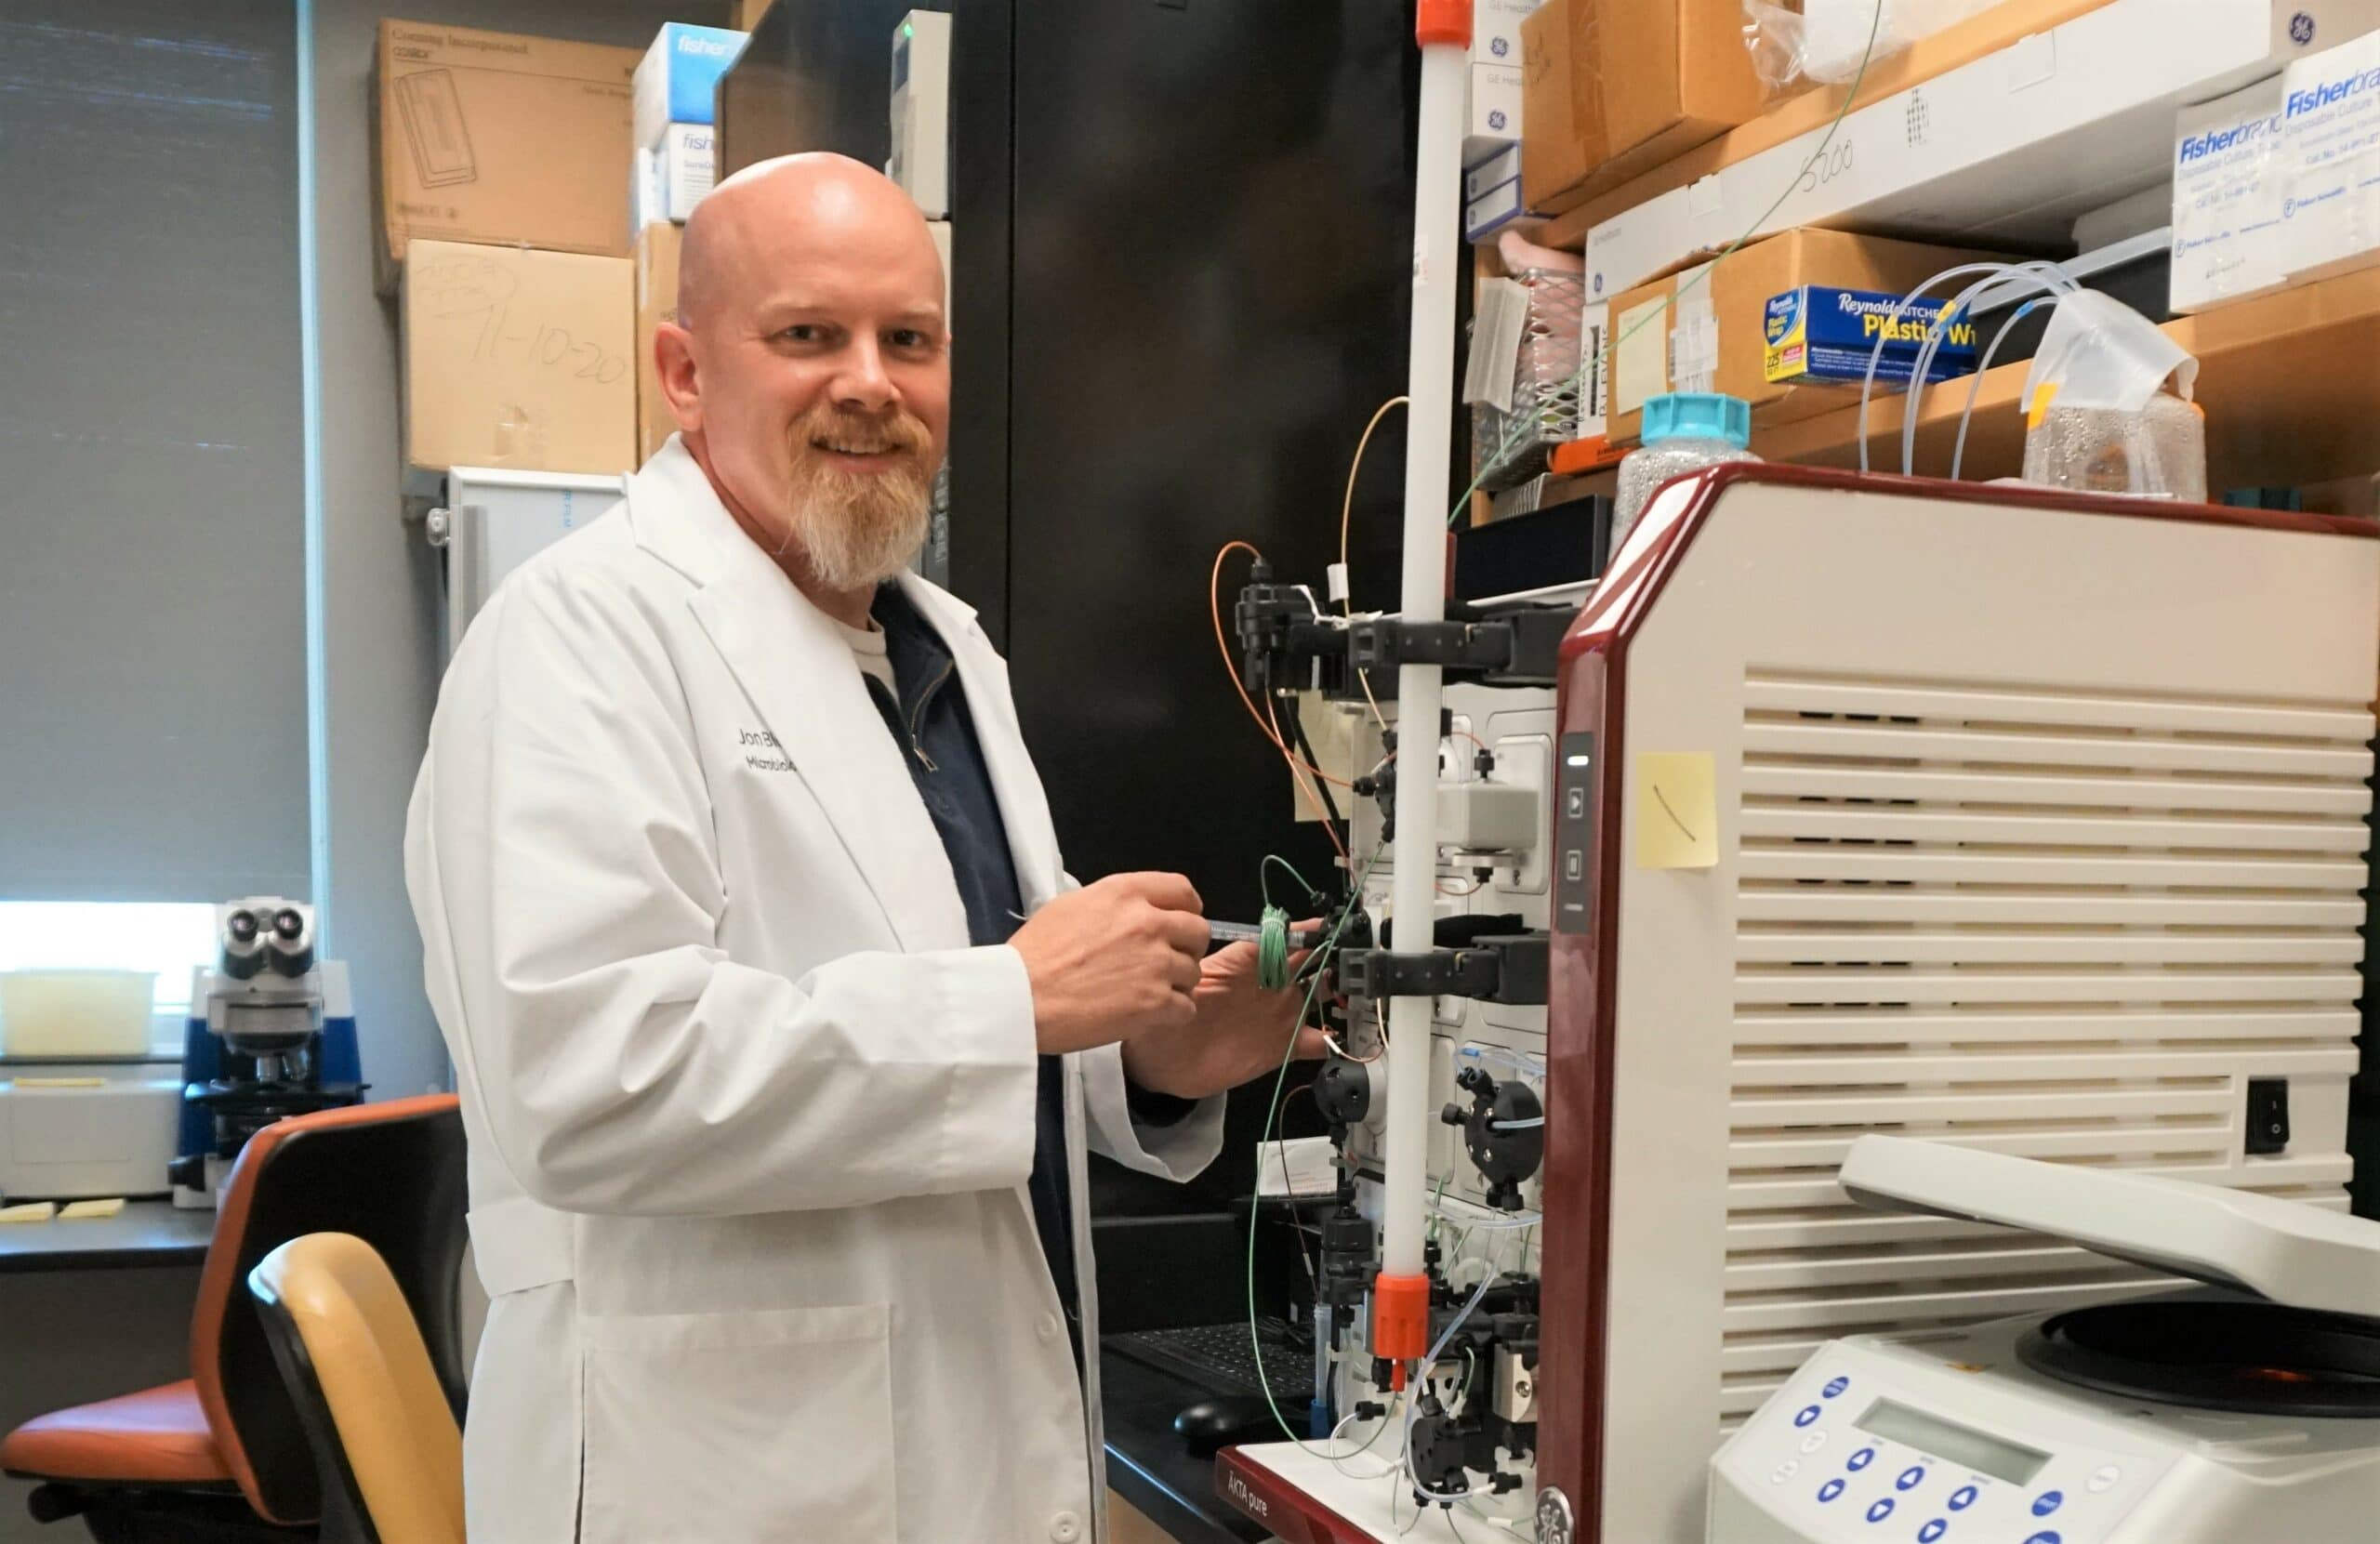 Jon Blevins, Ph.D., in his lab with a Cytiva ÄKTA pure chromatography system used for purification of proteins in his research of tick-borne relapsing fever.